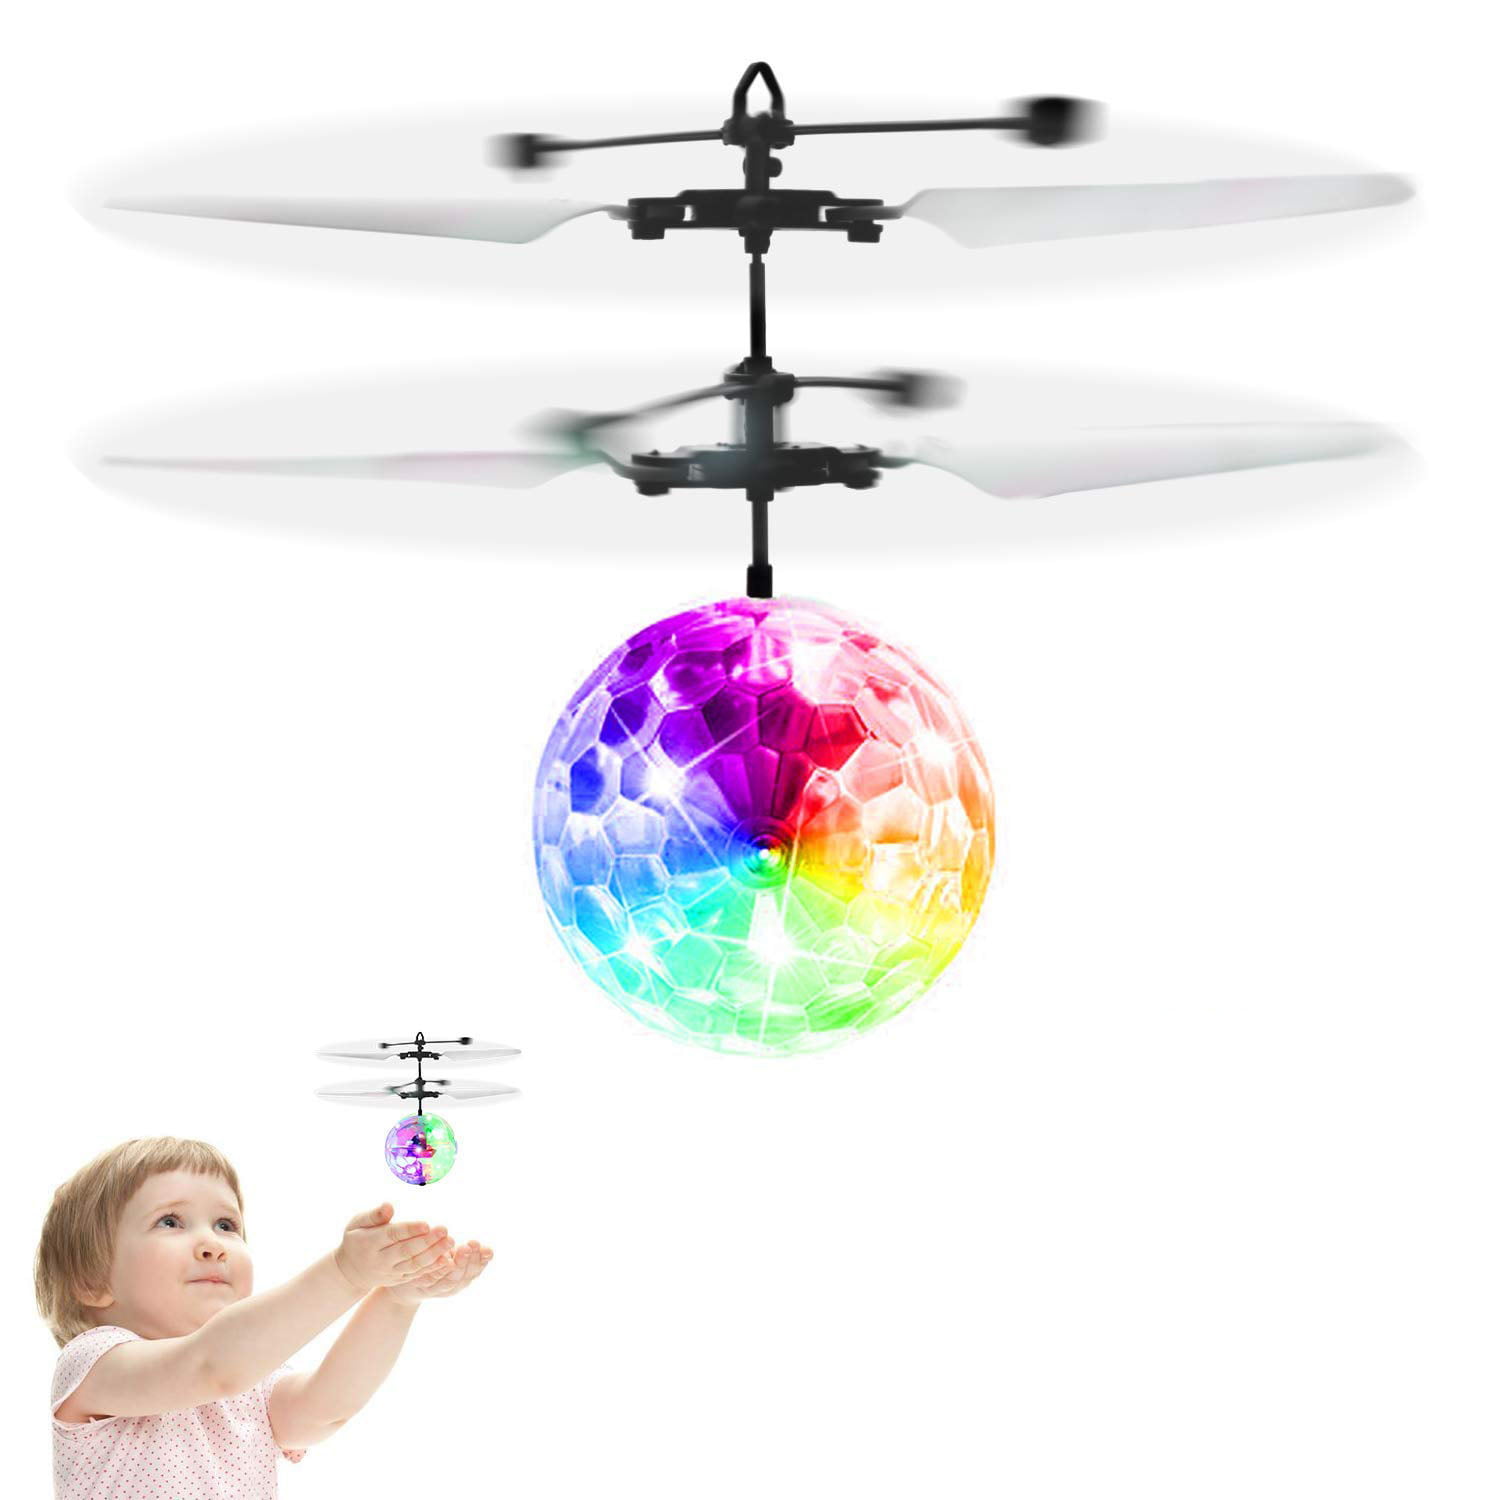 XBUTY Flying Ball Toys for Kids Hand Operated Mini Drone Helicopter for Boys and Girls 360° Rotating Quadcopter with LED Lights Red 